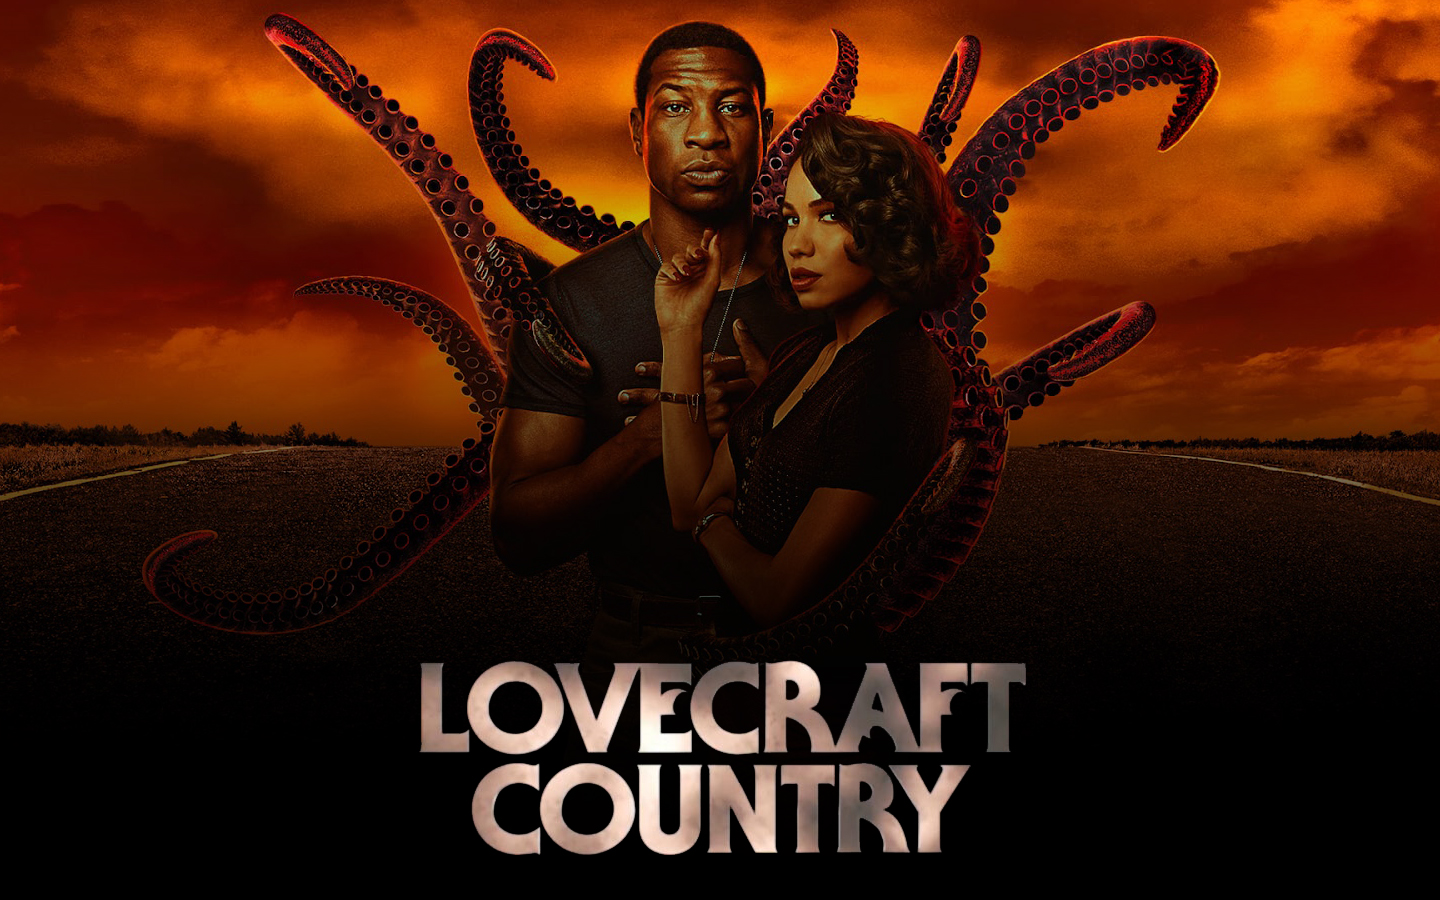 ‘Lovecraft Country’ is a Gripping Genre-Bending Exposition on Racism and the Real Monsters We Face – Review